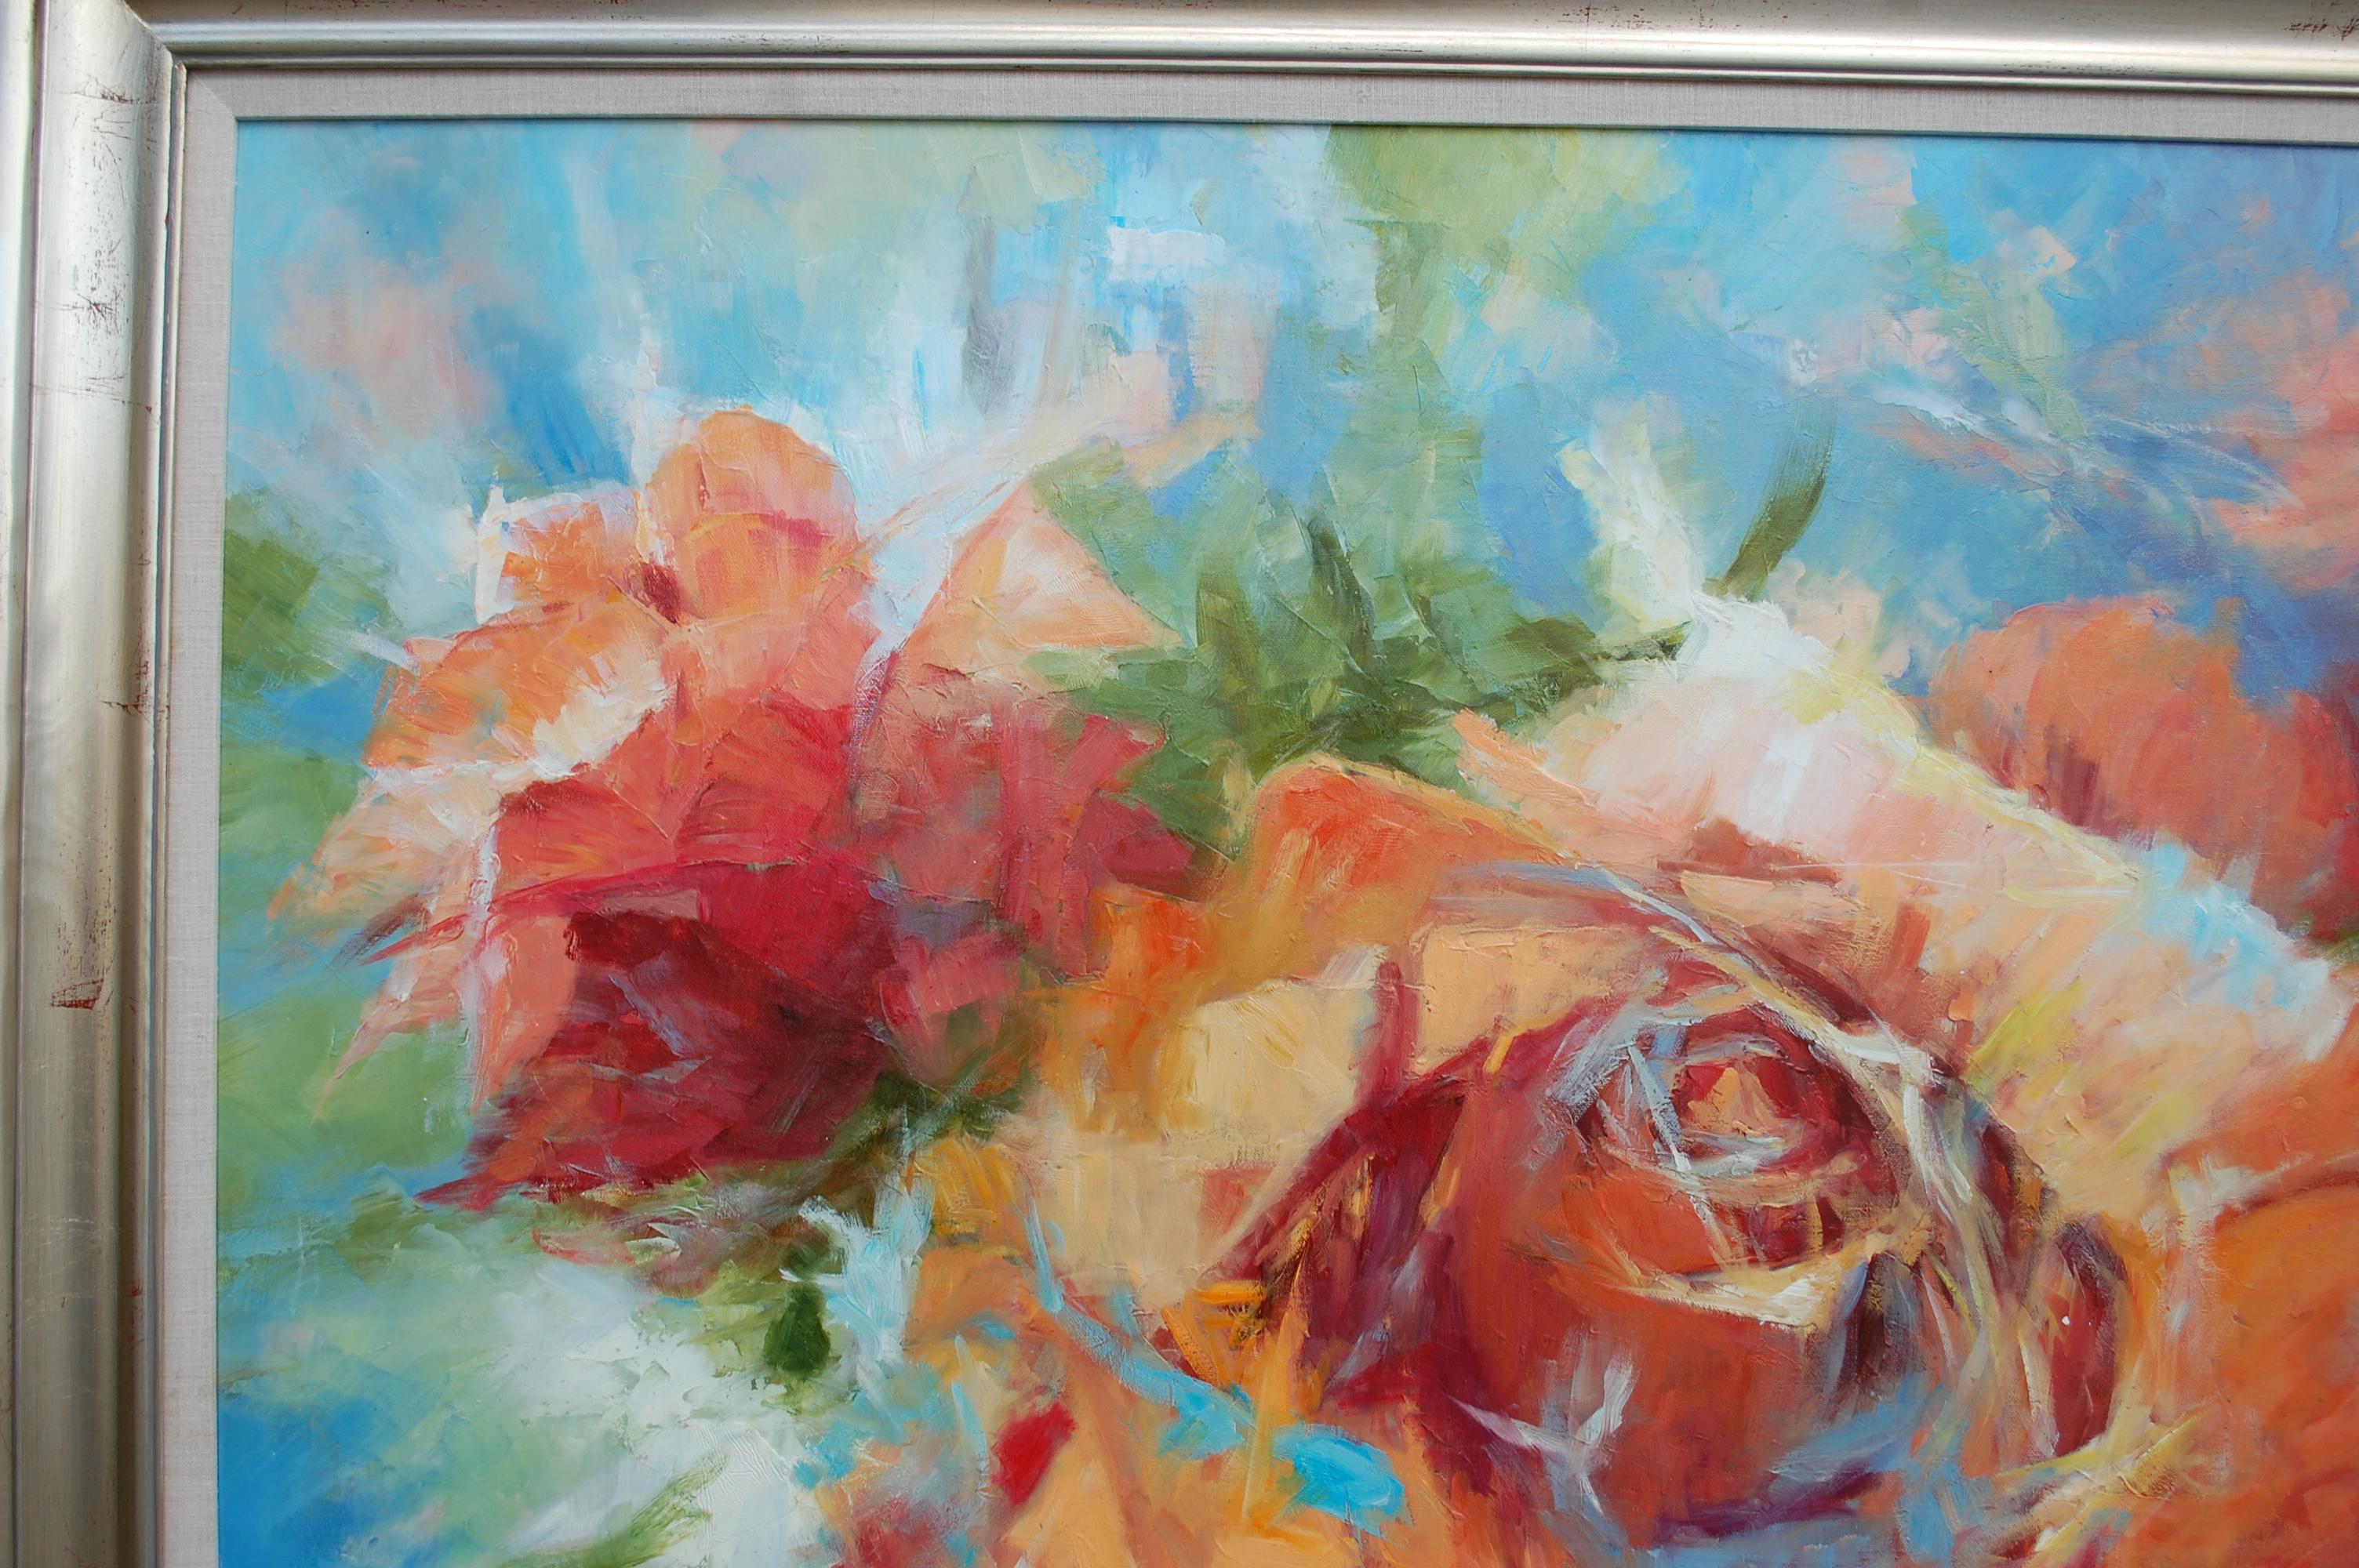 Pink Roses
Oil on canvas, artist signed.
At an early age Lisa began to draw and paint images of the lush Korean countryside. She loved the colors and beauty of nature. Lisa enjoys painting still-life floral bouquets; water lilies and the colorful